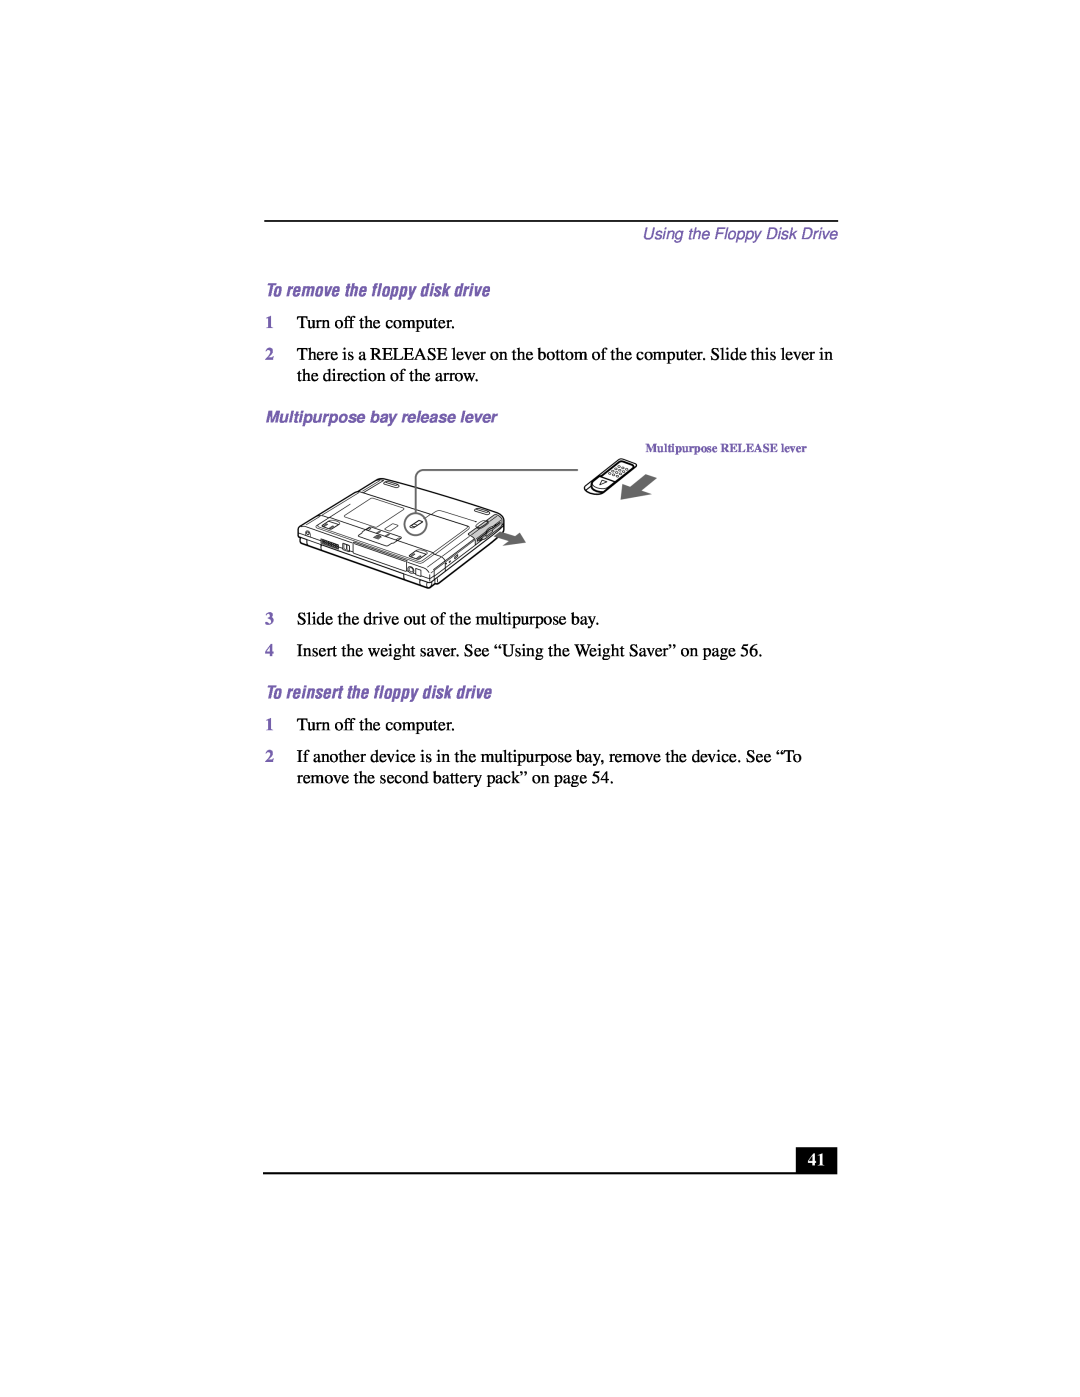 Sony PCG-F640 manual To remove the floppy disk drive, To reinsert the floppy disk drive, Multipurpose bay release lever 